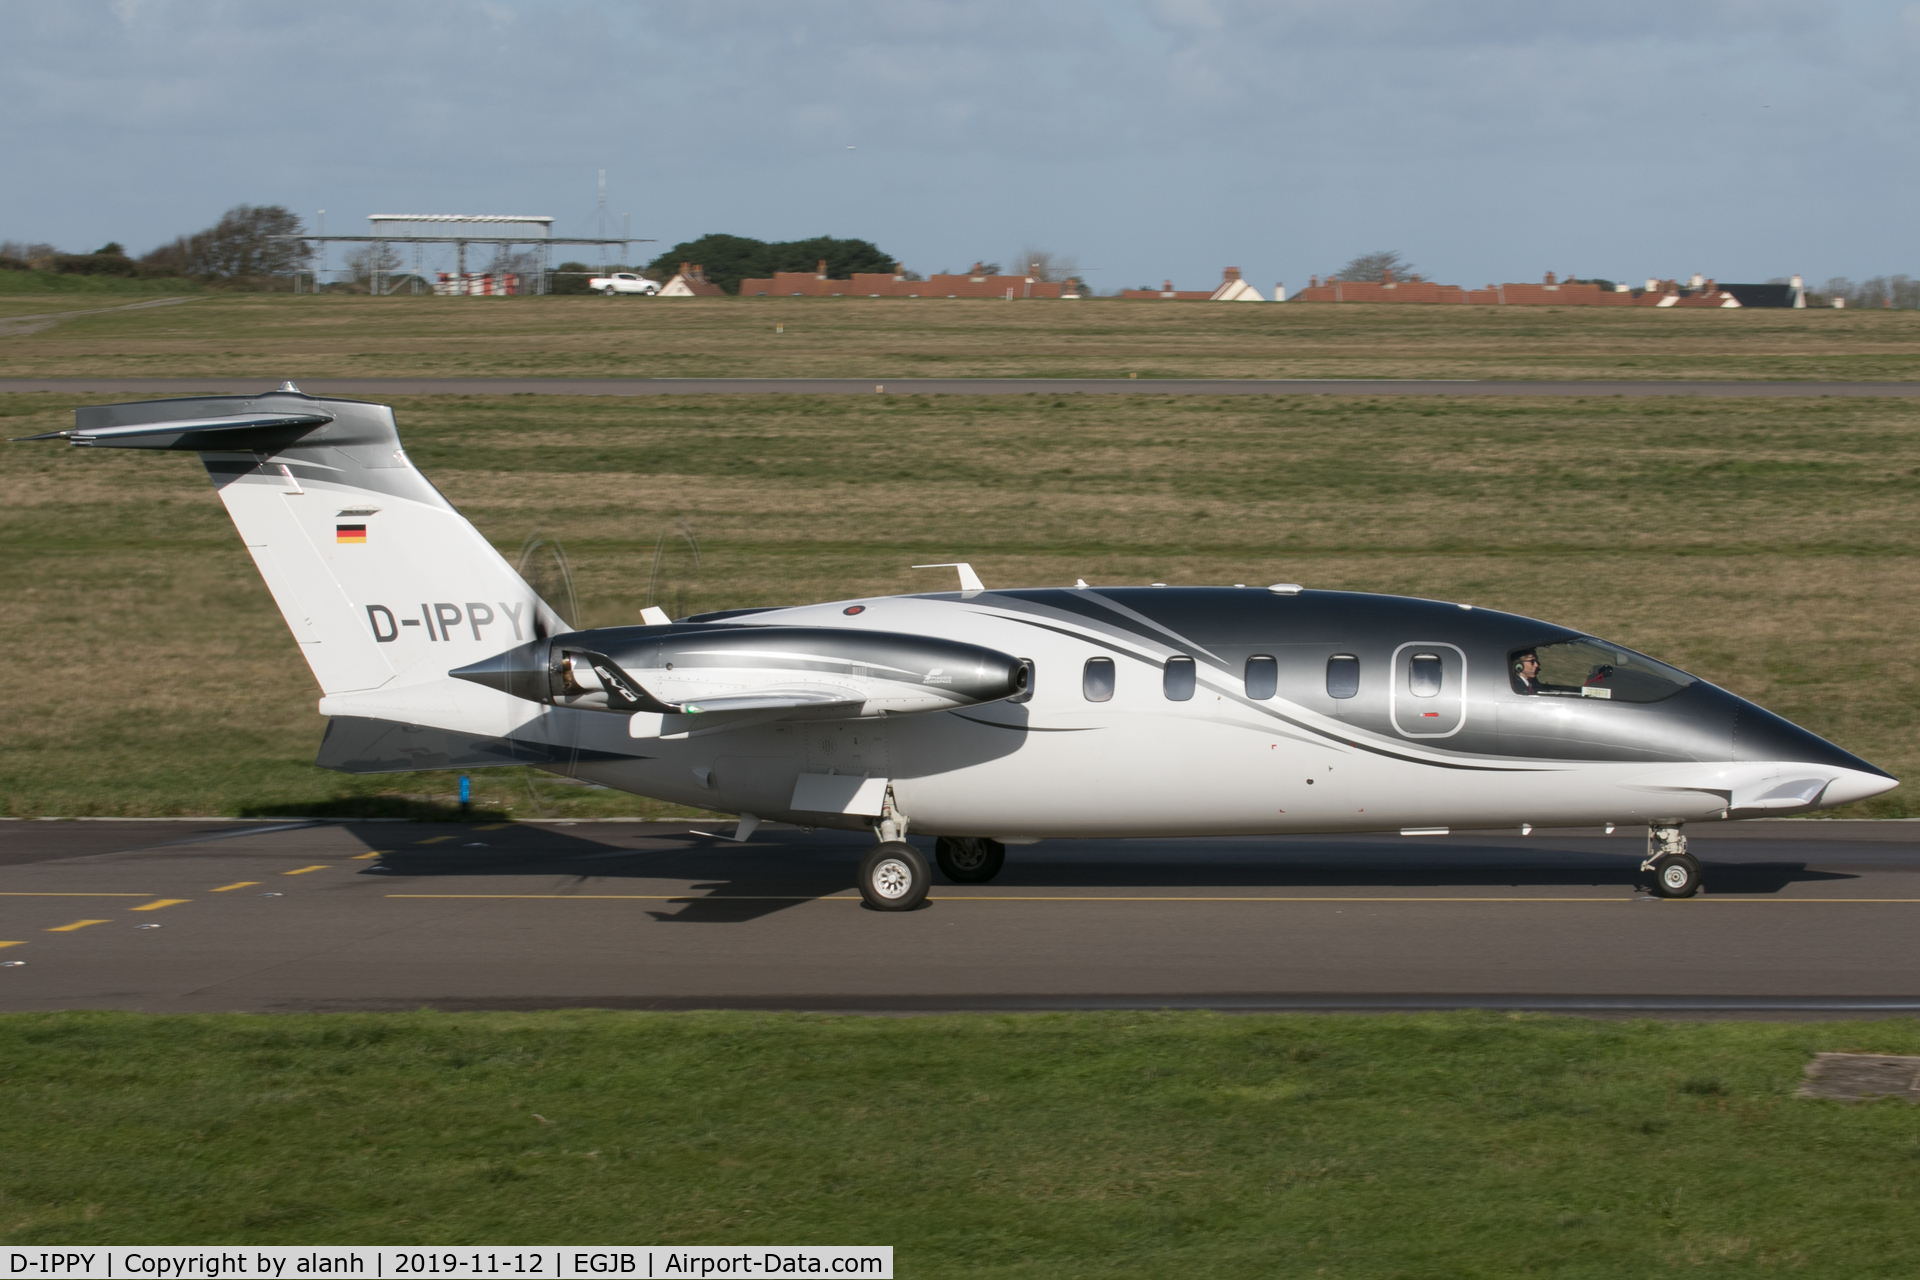 D-IPPY, 2018 Piaggio P-180 Avanti II EVO C/N 3010, Taxying after arrival at Guernsey